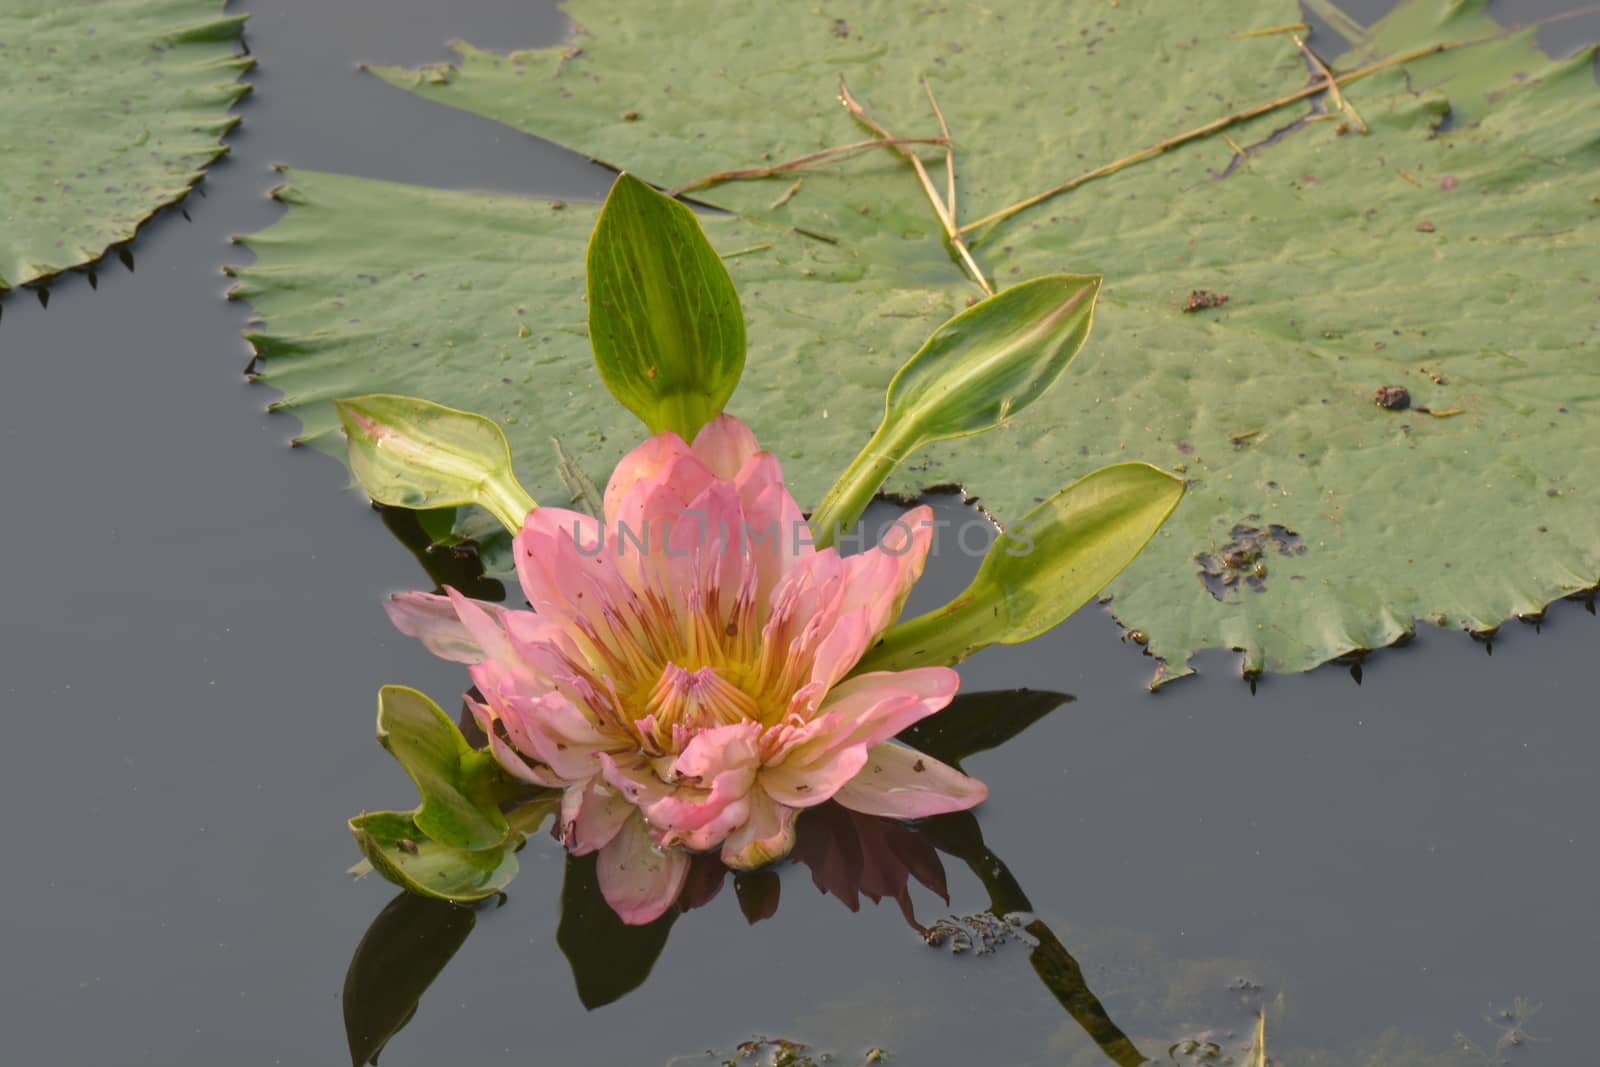 A beautiful old rose water lily  or lotus flower in pond by ideation90